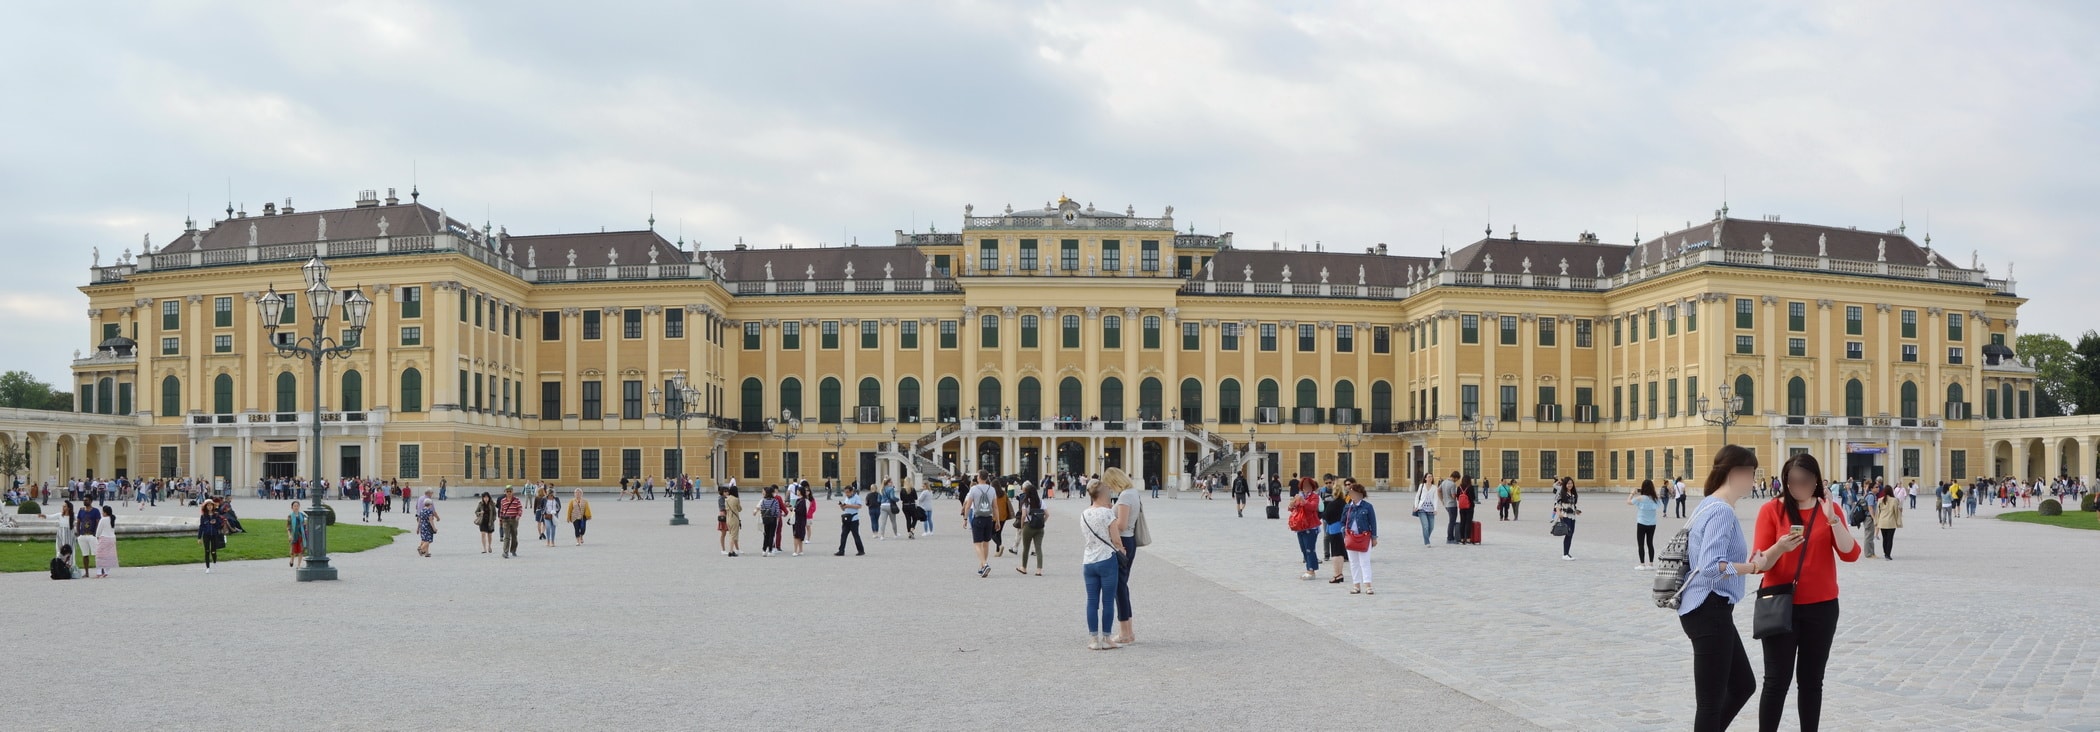 In the courtyard of the Schönbrunn Palace